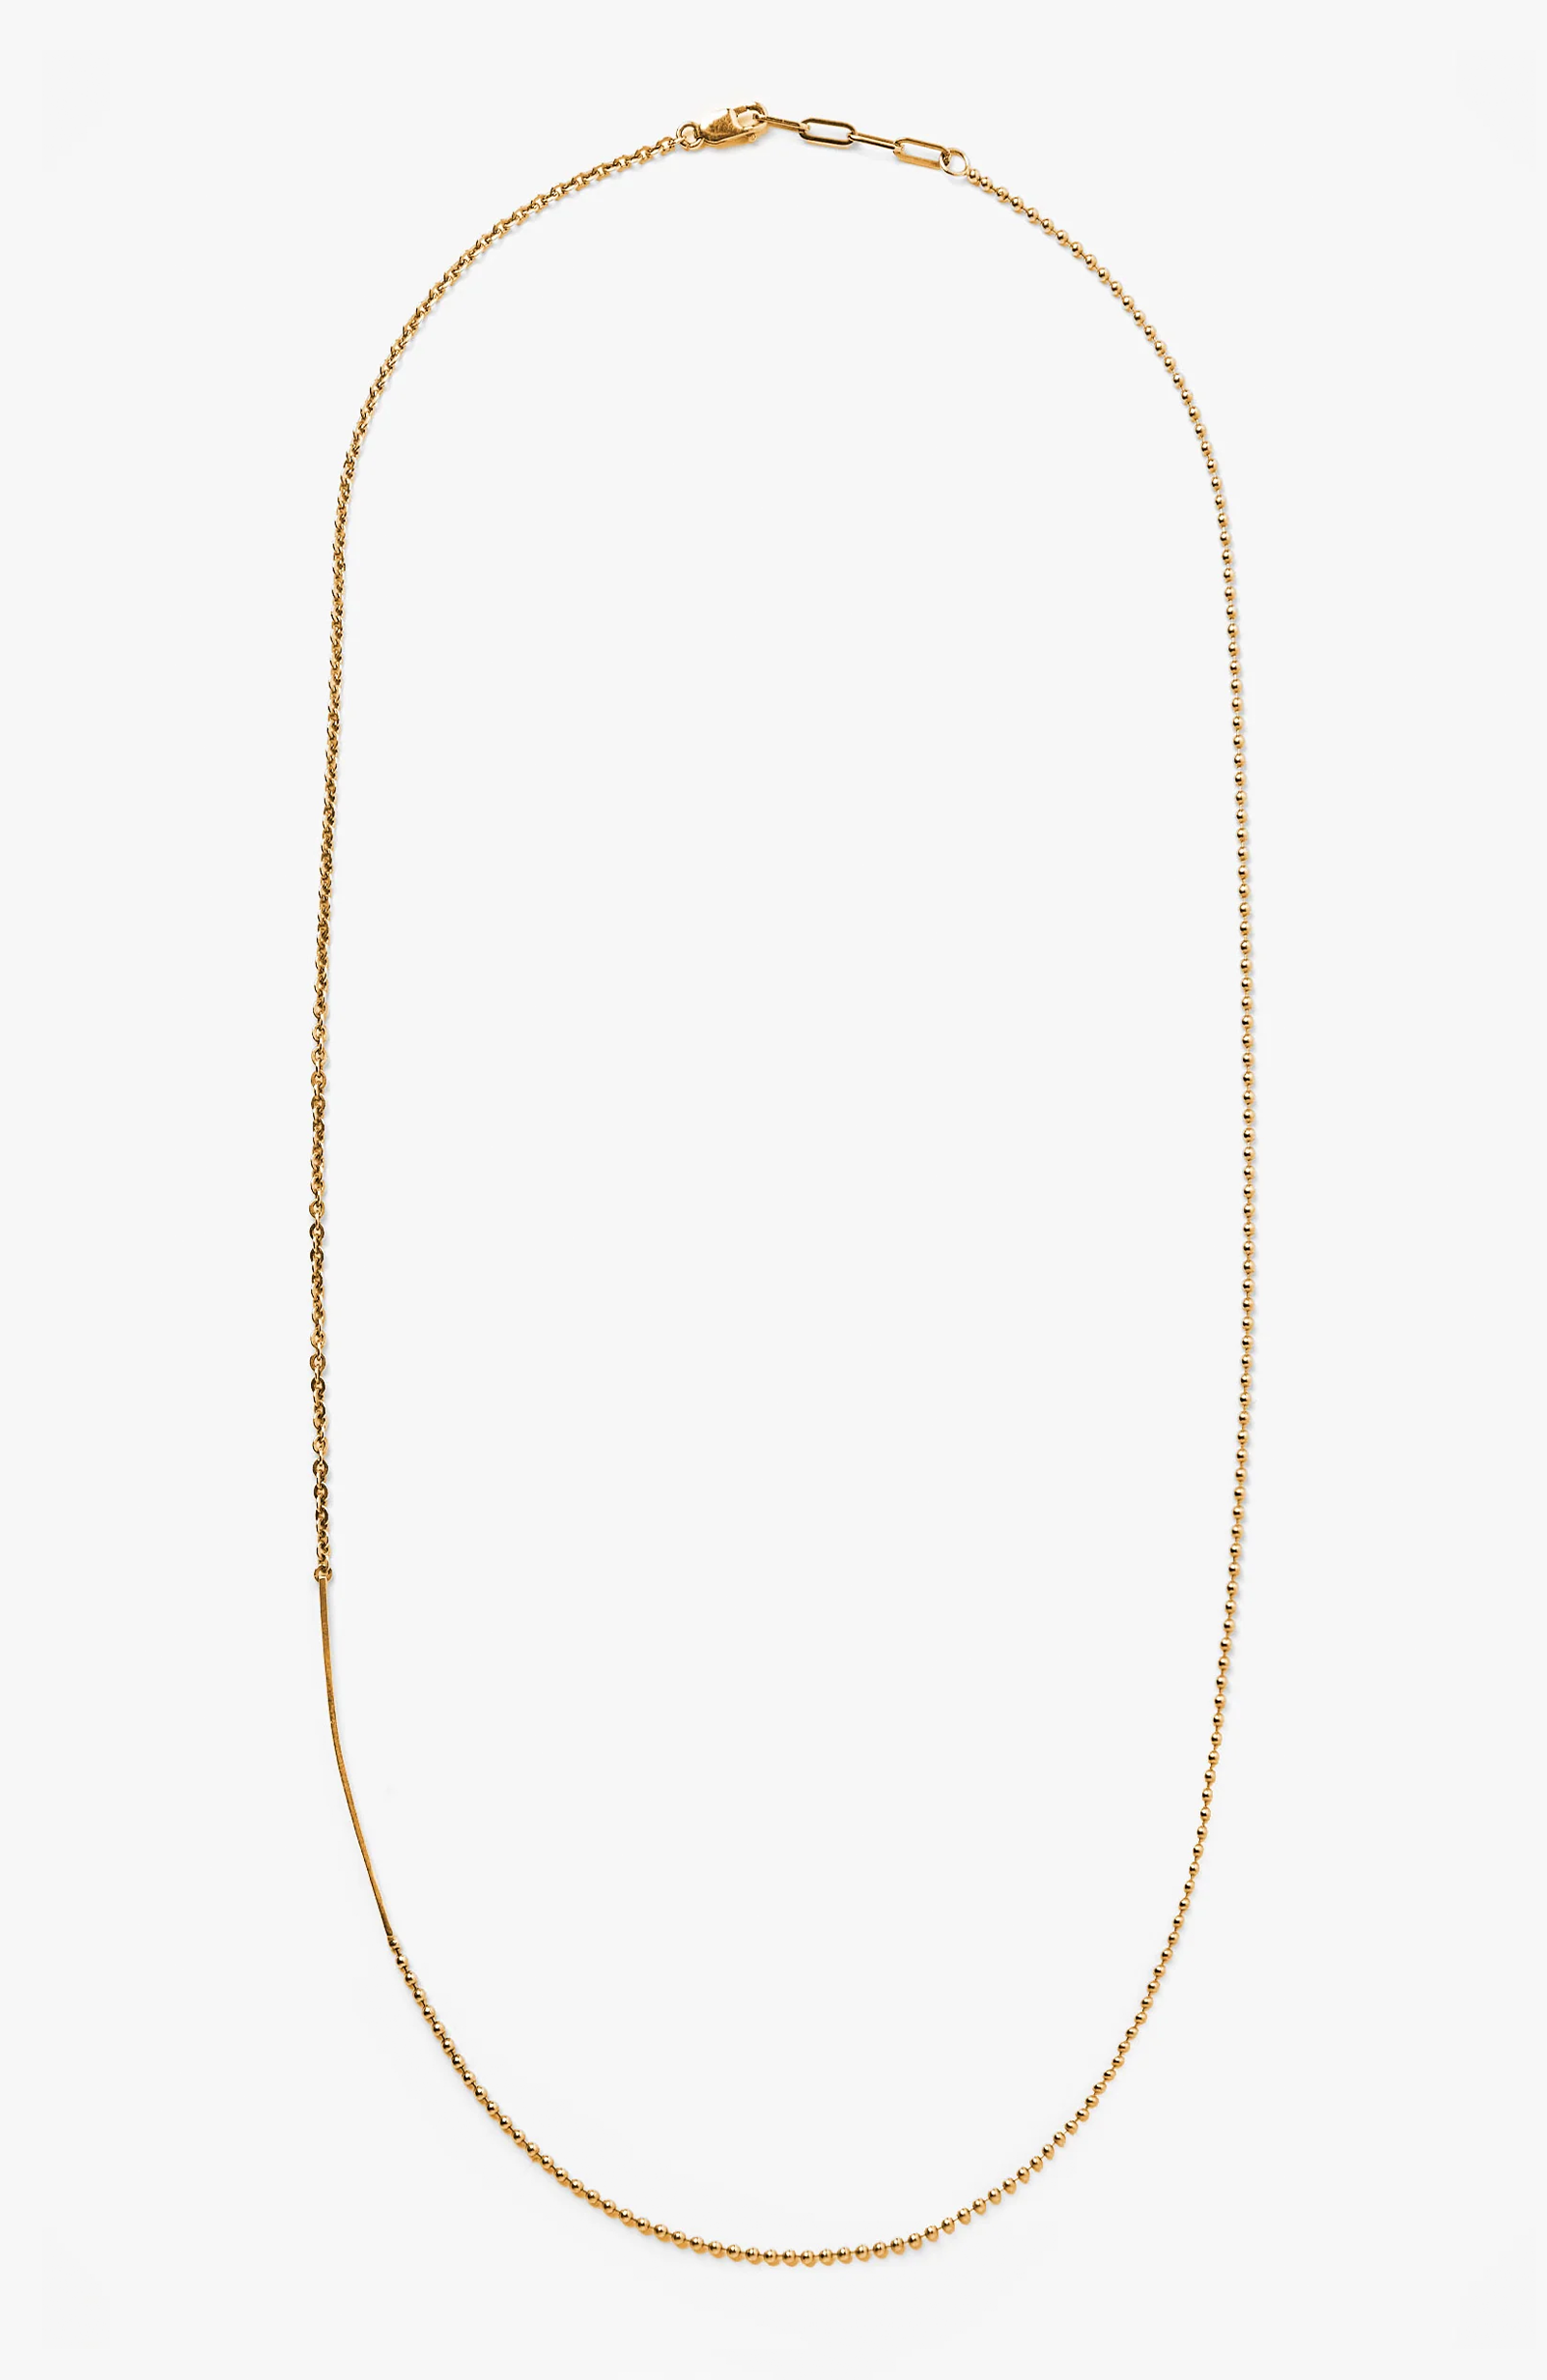 18K SOLID YELLOW GOLD NECKLACE 142